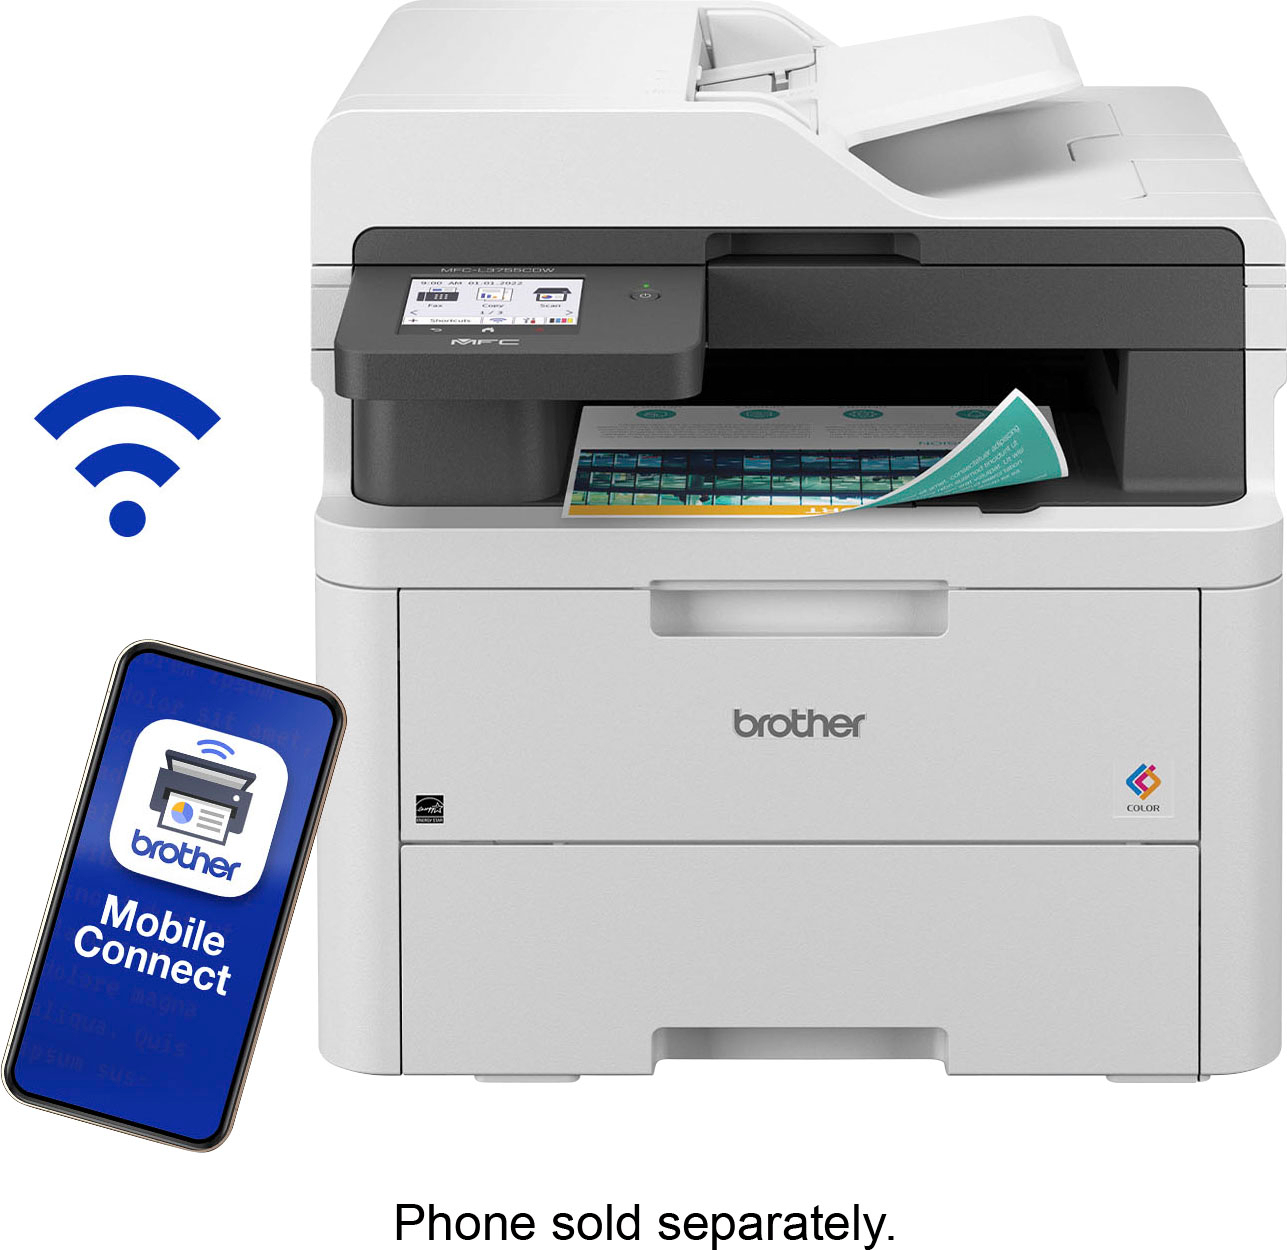 Brother DCPL3550CDW All-in-One Wireless Laser Printer, Product Overview